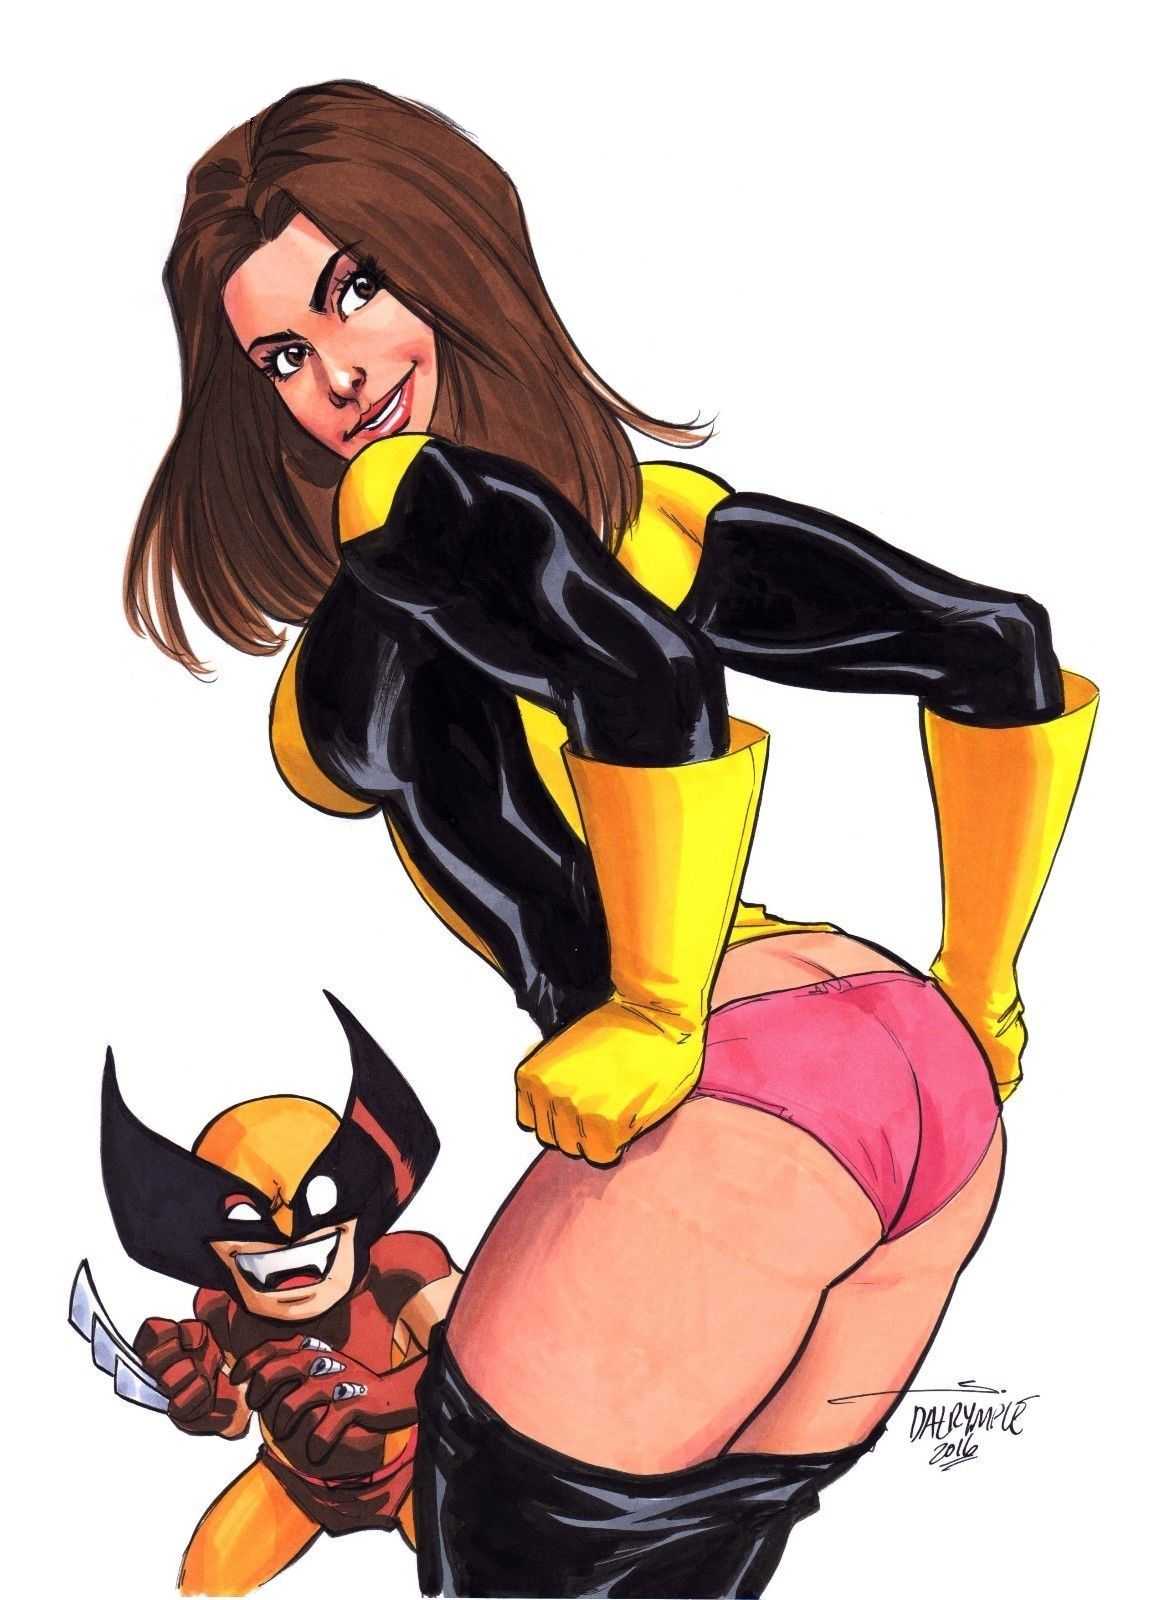 51 Hot Pictures Of Kitty Pryde That Will Make Your Heart Pound For Her 10